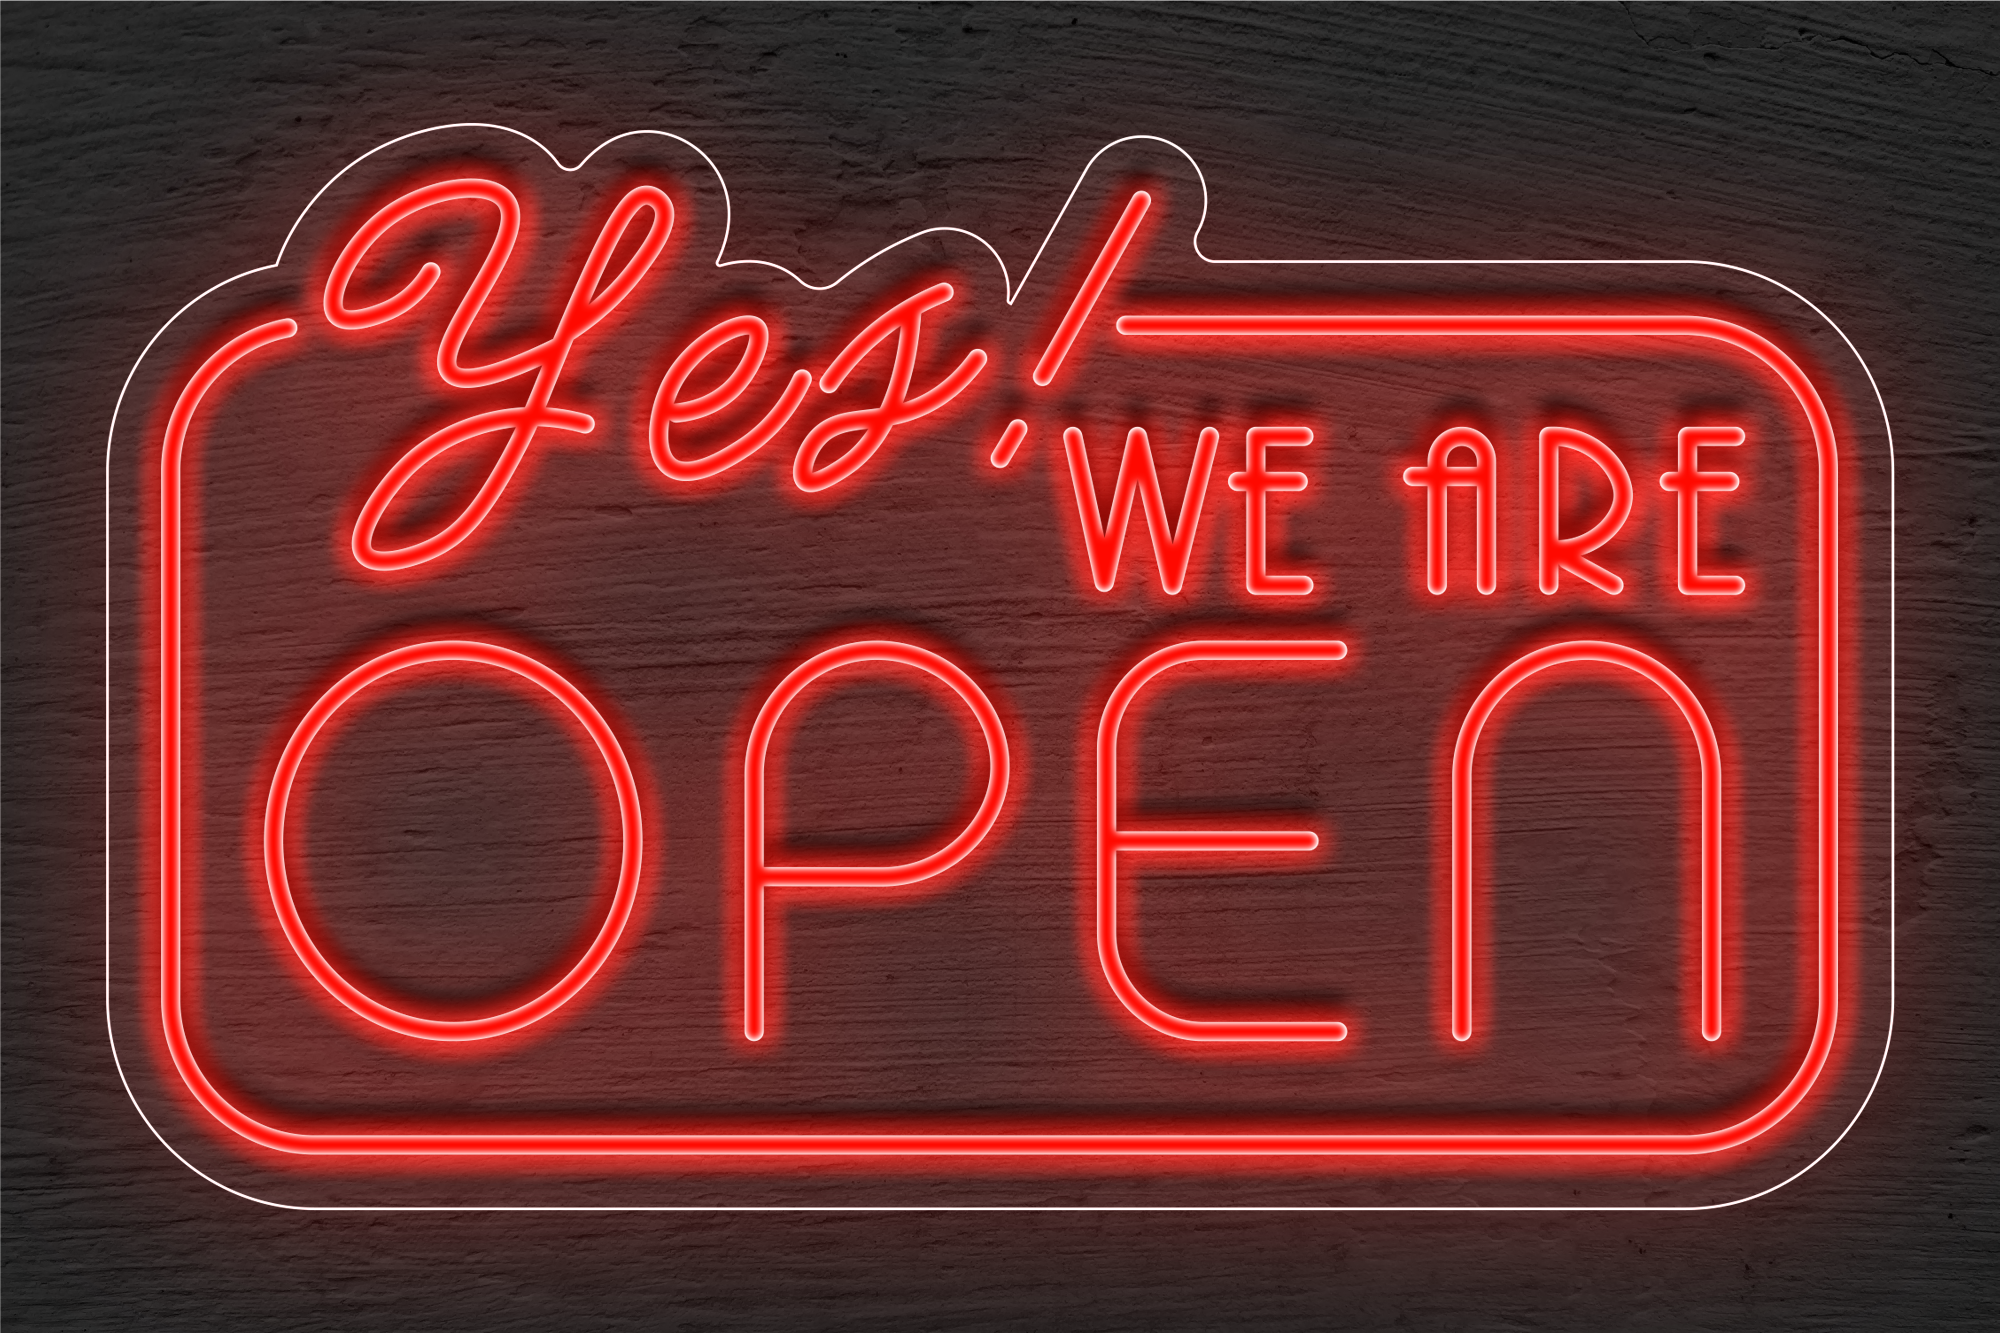 "Yes! WE ARE OPEN" LED Neon Sign